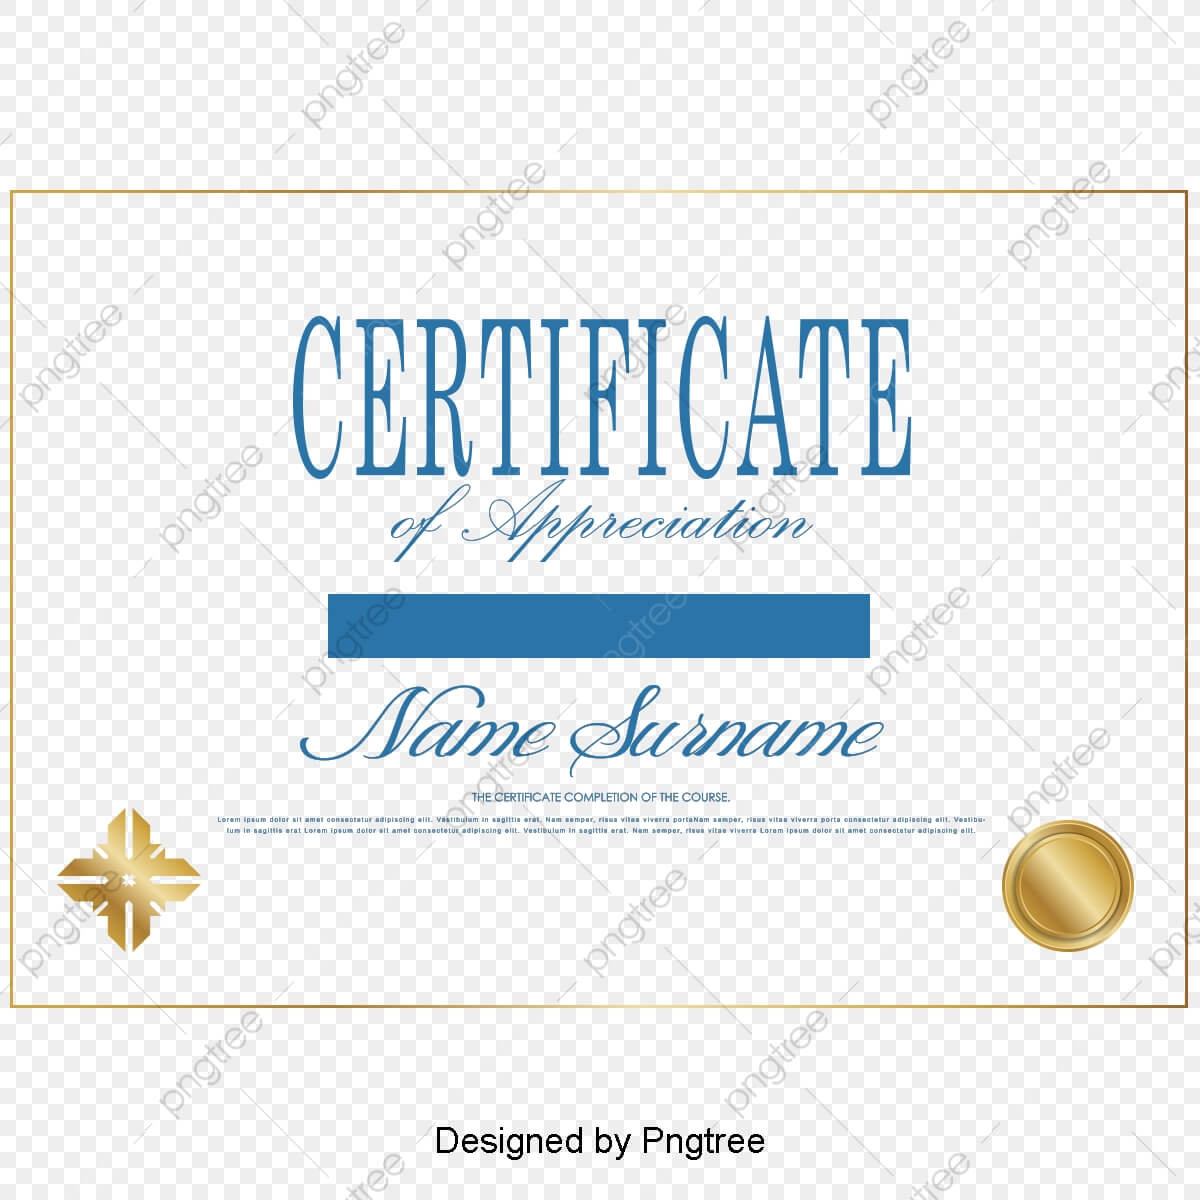 Simple Certificate Certificates Design Vector Material Intended For Update Certificates That Use Certificate Templates